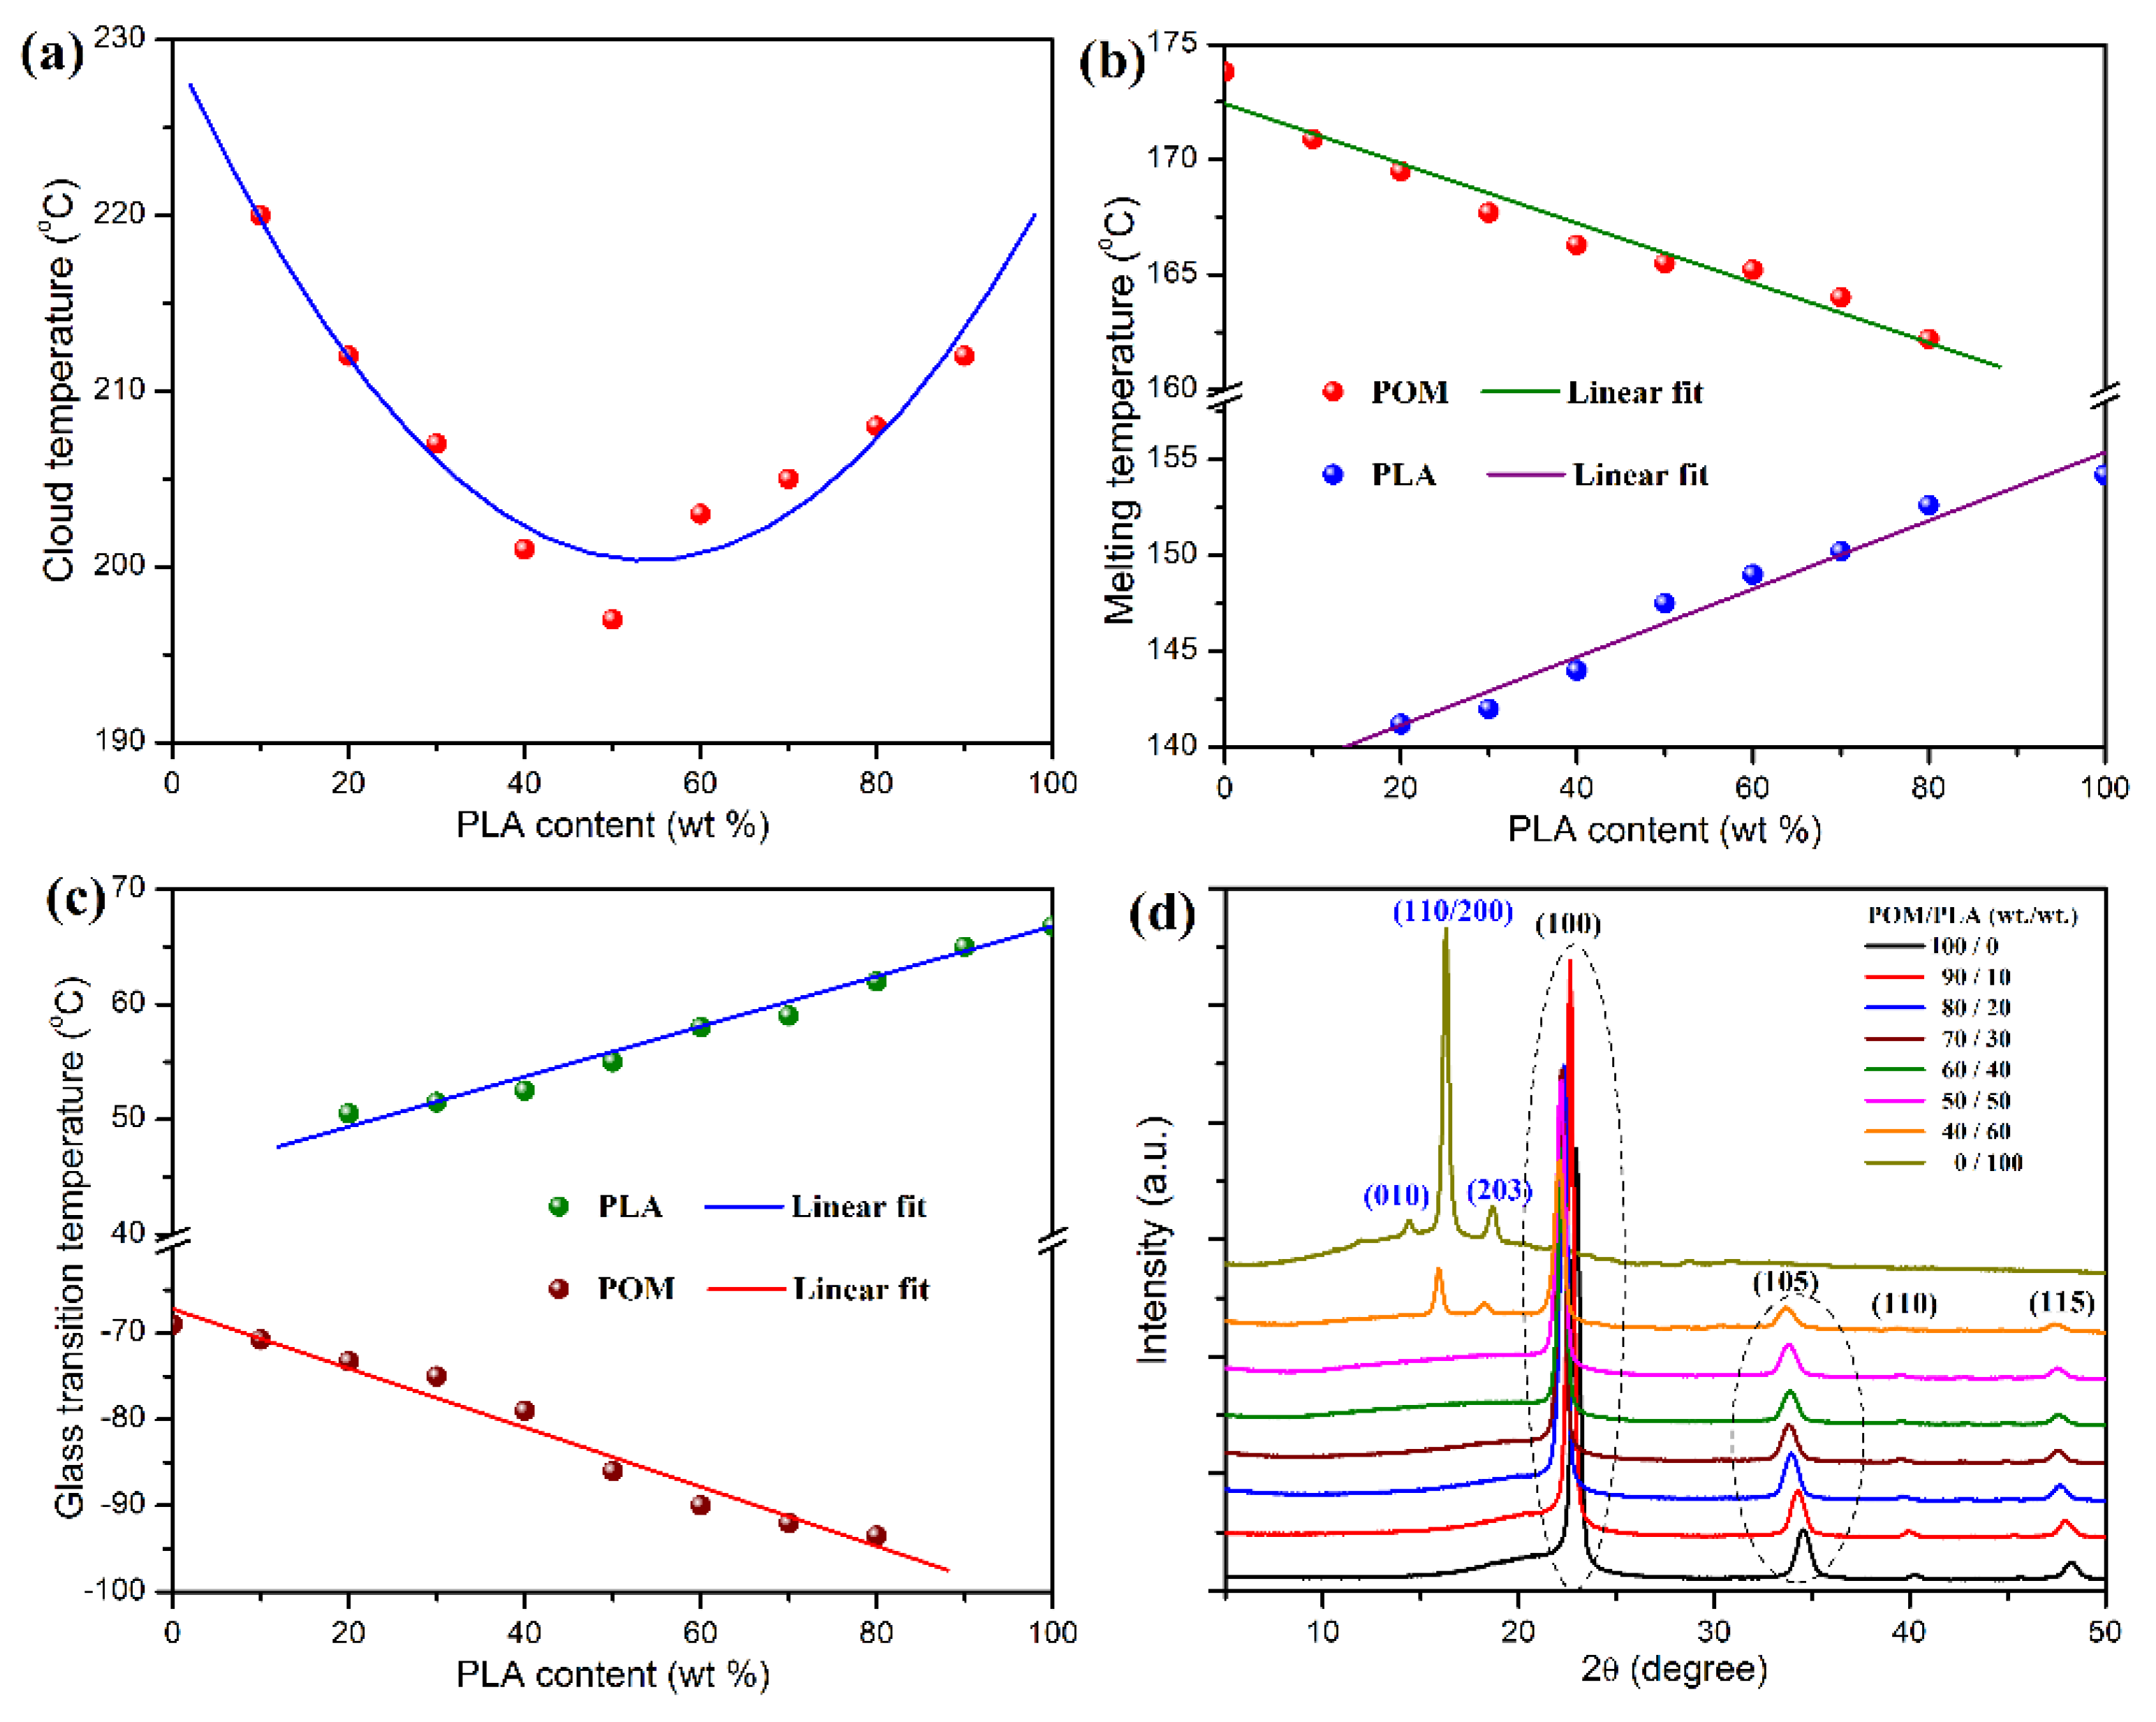 Polymers | Free Full-Text | Development Polyoxymethylene/Polylactide Blends for a Potentially Material: Crystallization Kinetics, Lifespan Prediction, and Degradation Behavior | HTML